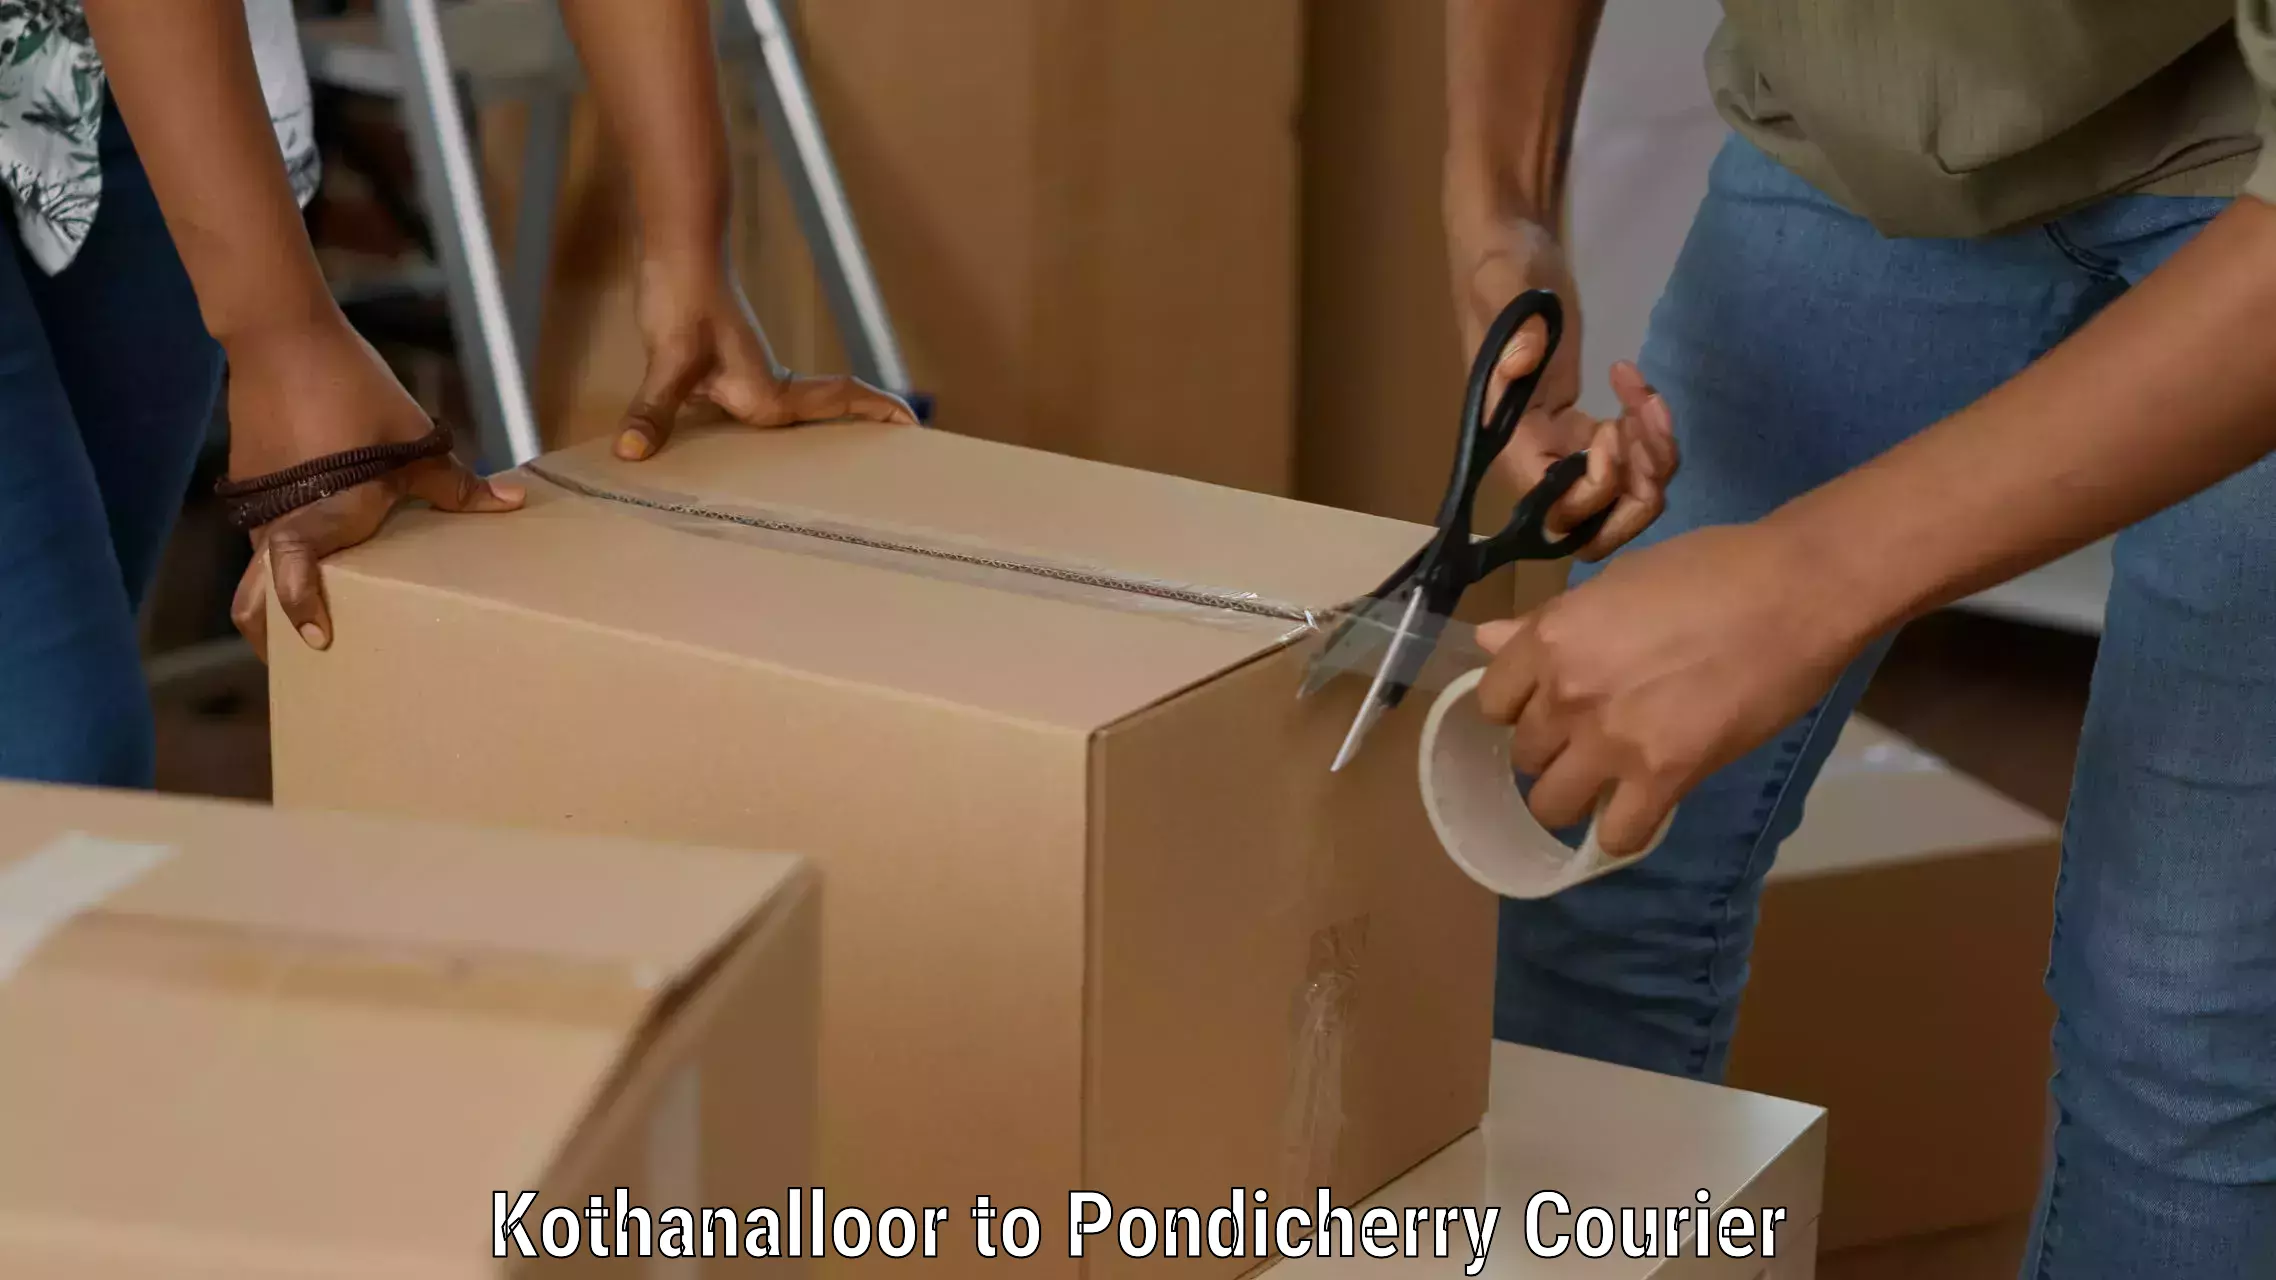 State-of-the-art courier technology Kothanalloor to Pondicherry